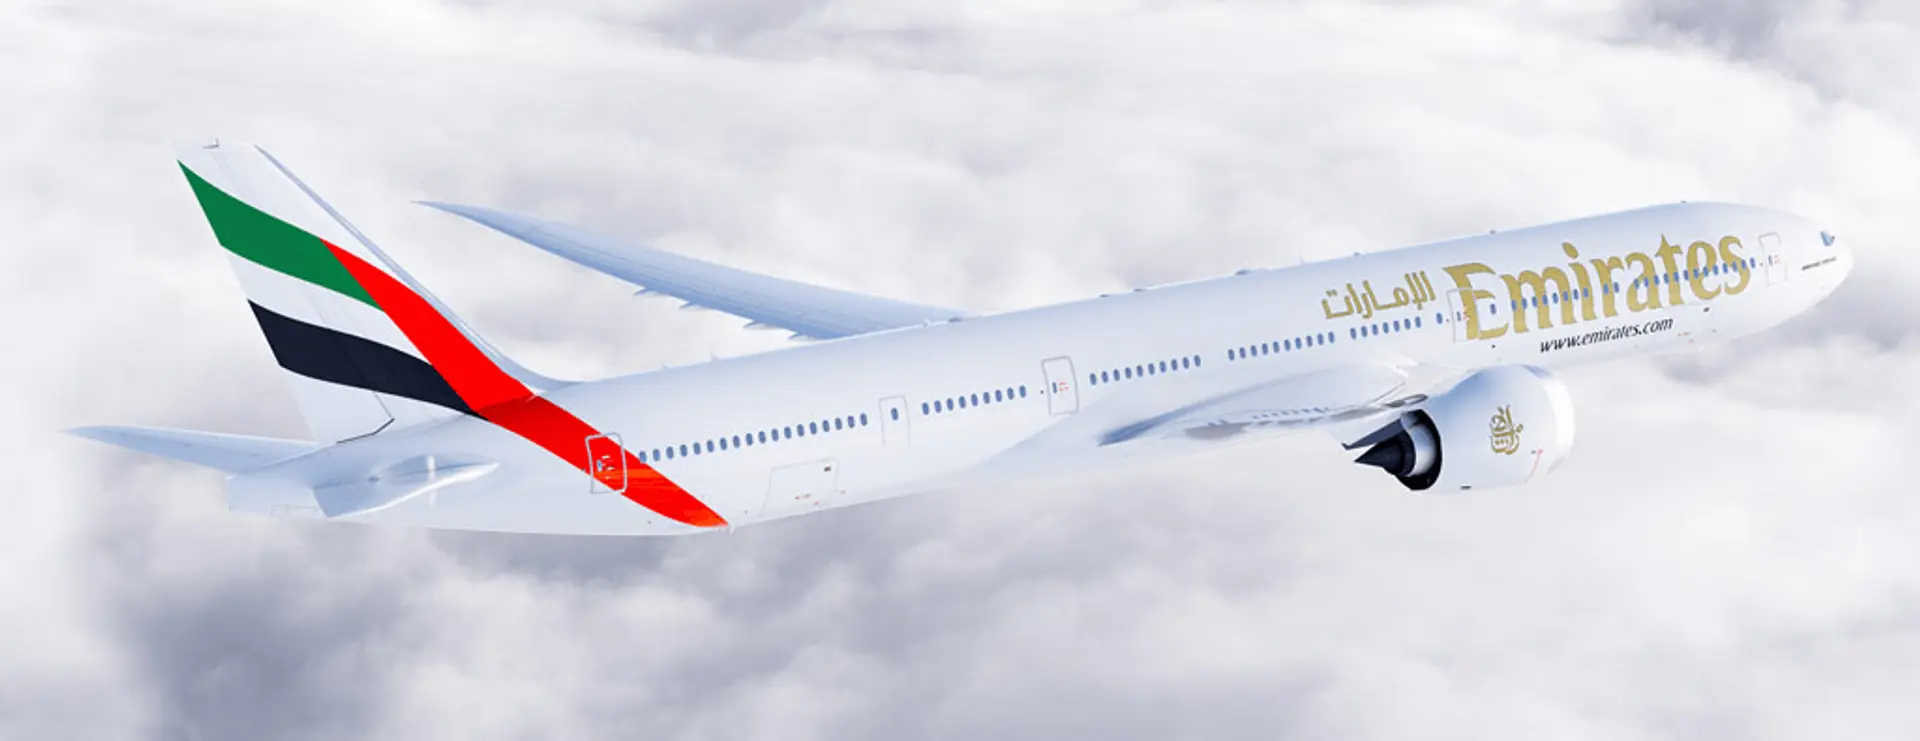 Airlines News - The Boeing B777X sets an entirely new standard